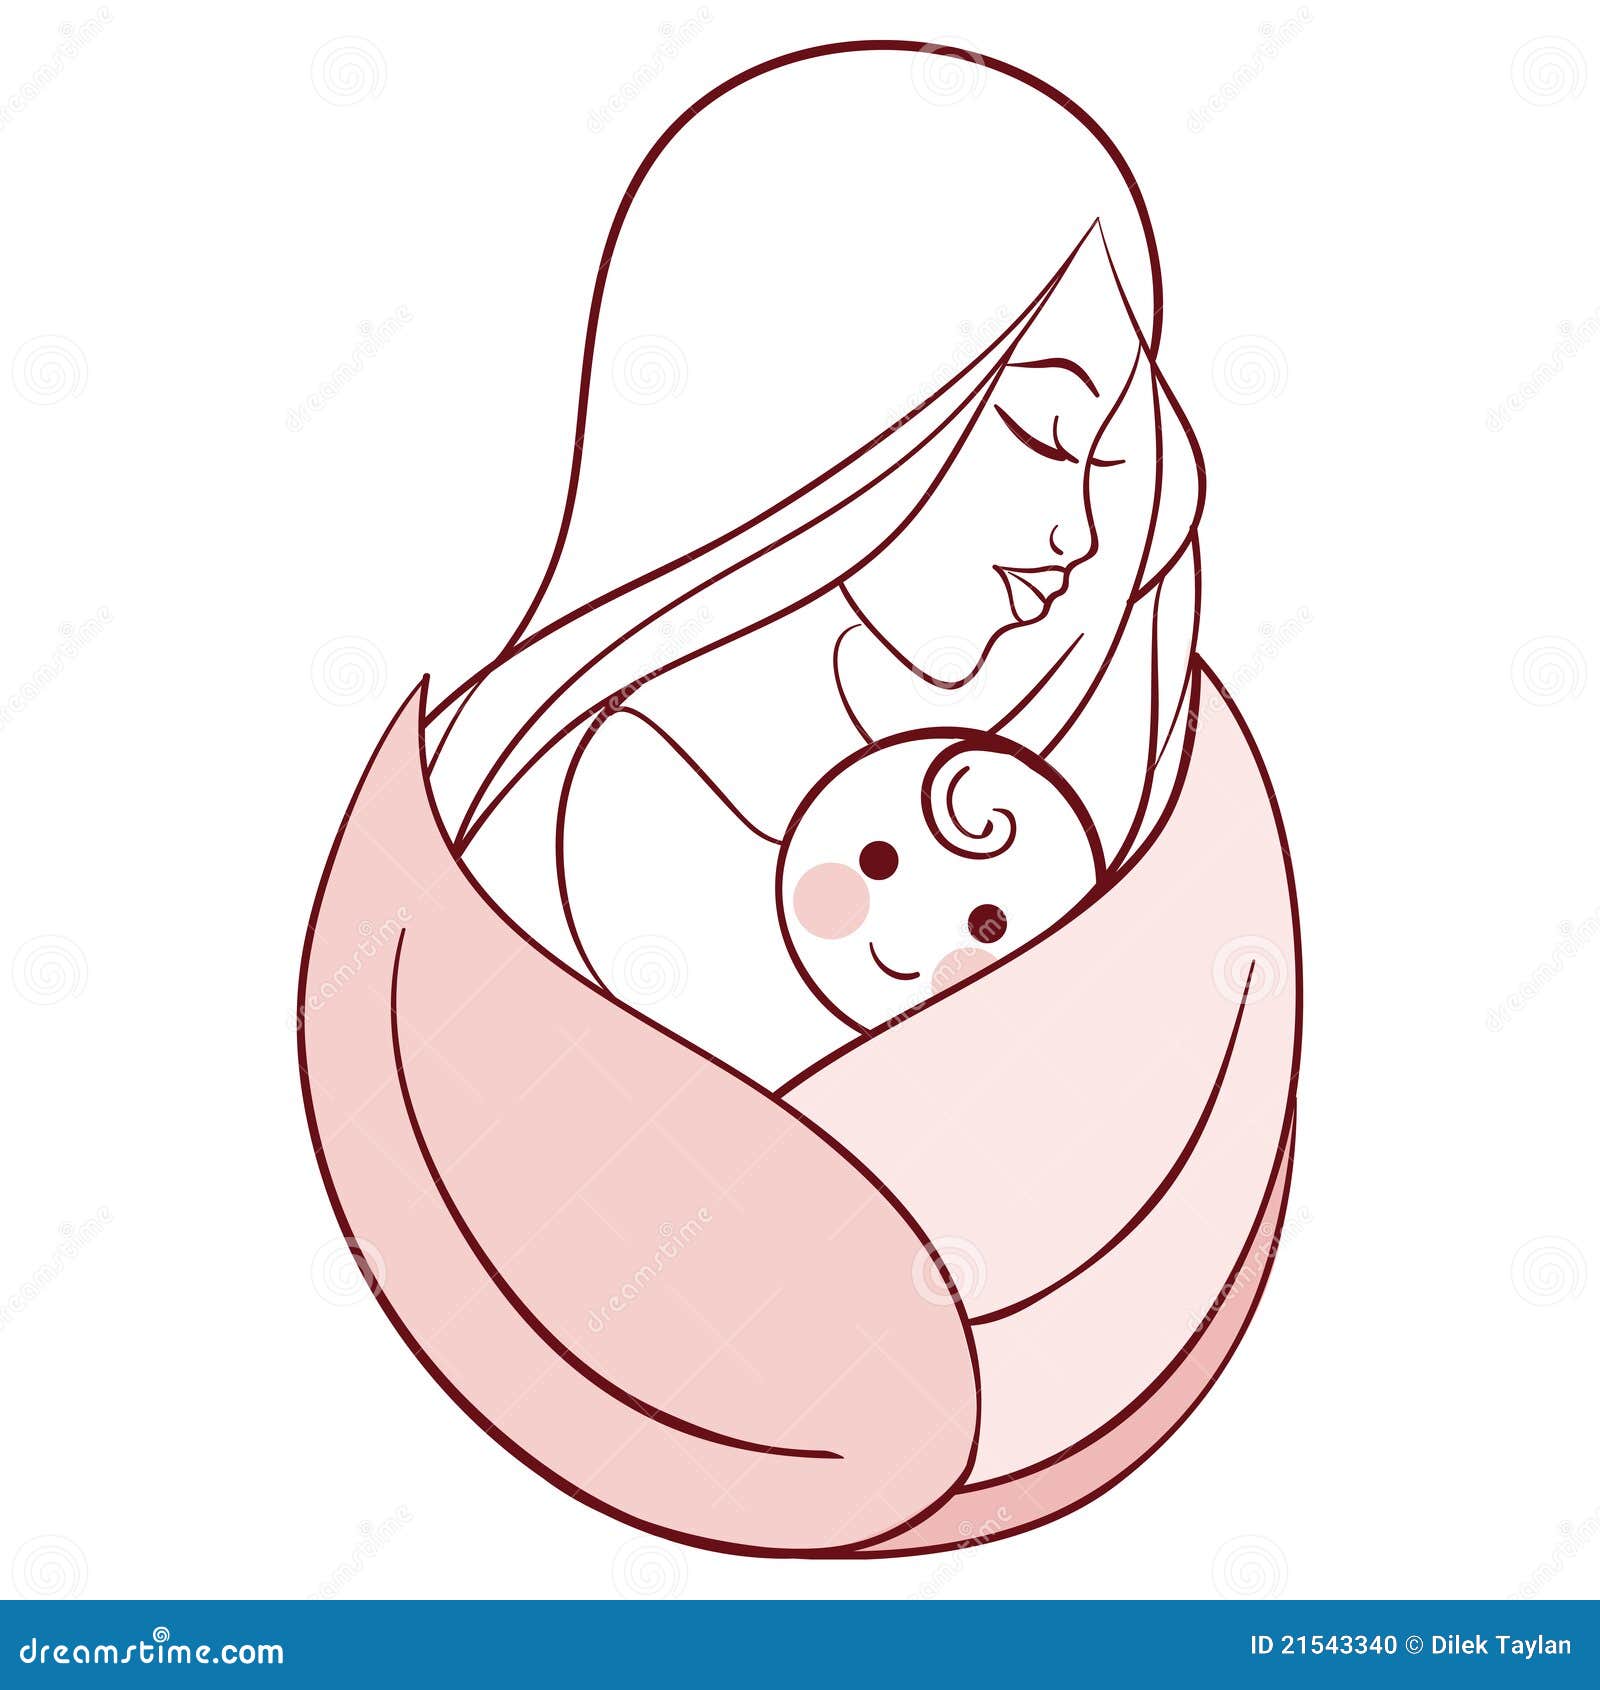 mother and child clipart - photo #44